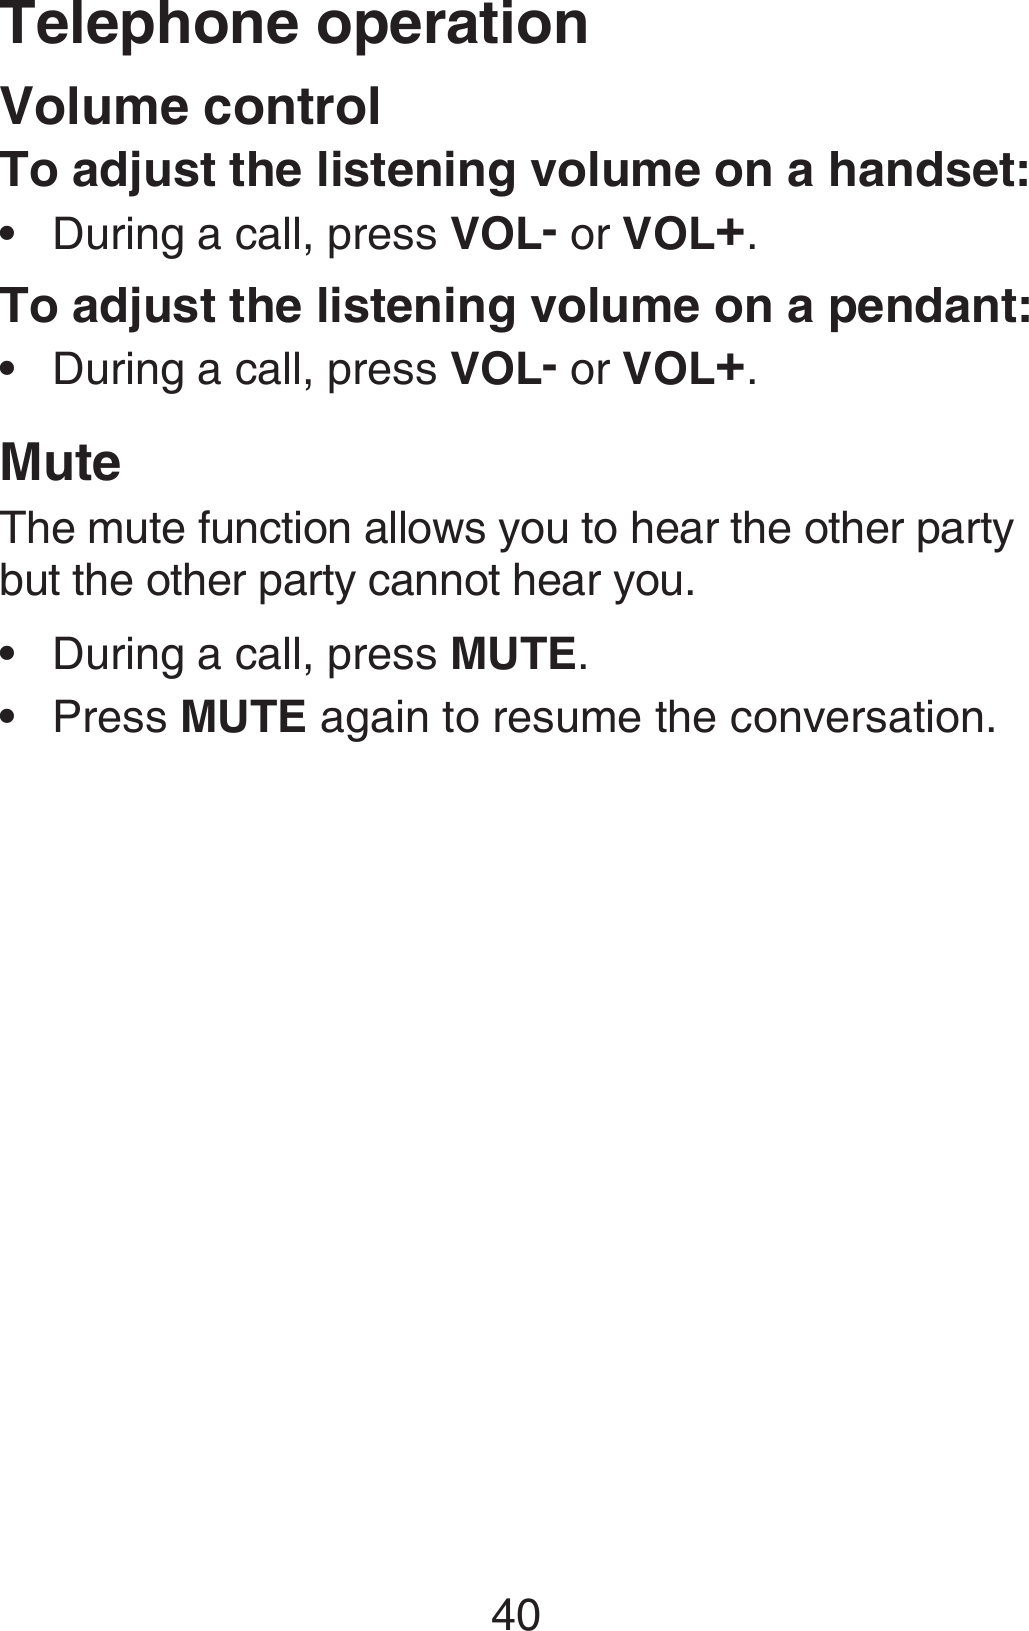 Telephone operation40Volume controlTo adjust the listening volume on a handset:During a call, press VOL- or VOL+.To adjust the listening volume on a pendant:During a call, press VOL- or VOL+.MuteThe mute function allows you to hear the other party but the other party cannot hear you.During a call, press MUTE.Press MUTE again to resume the conversation.••••